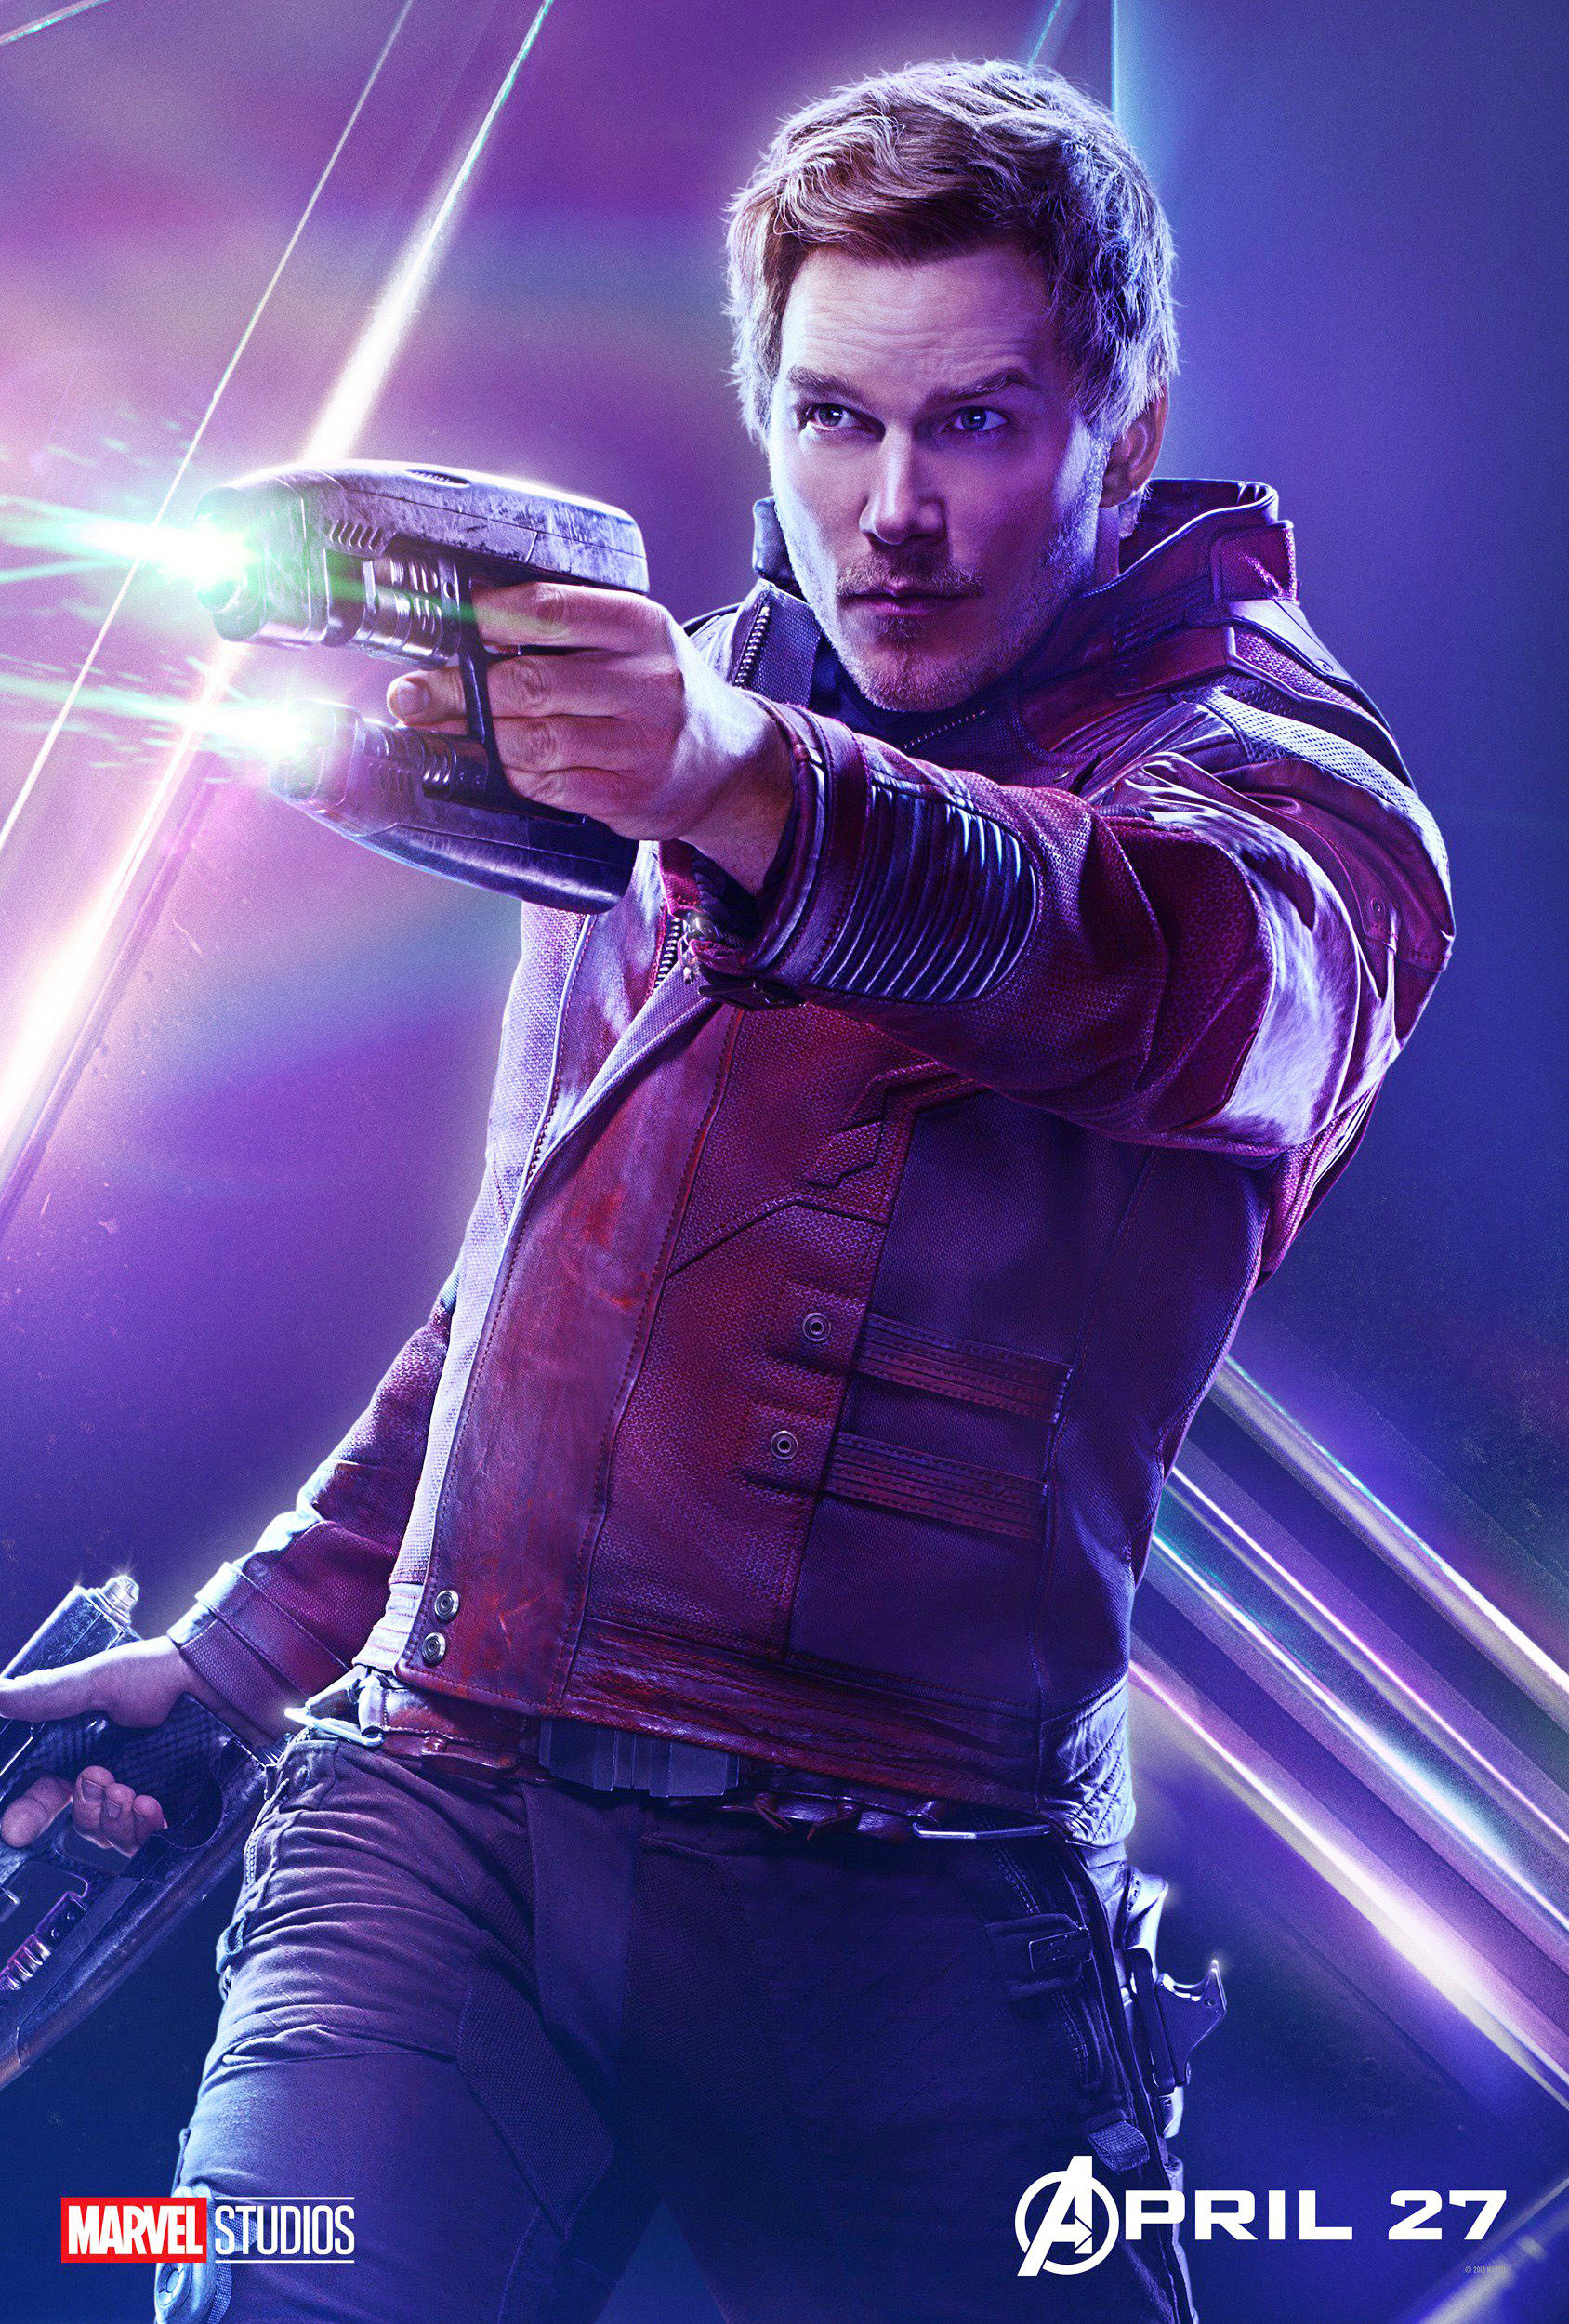 Star-Lord wearing his outfit on an Infinity War poster